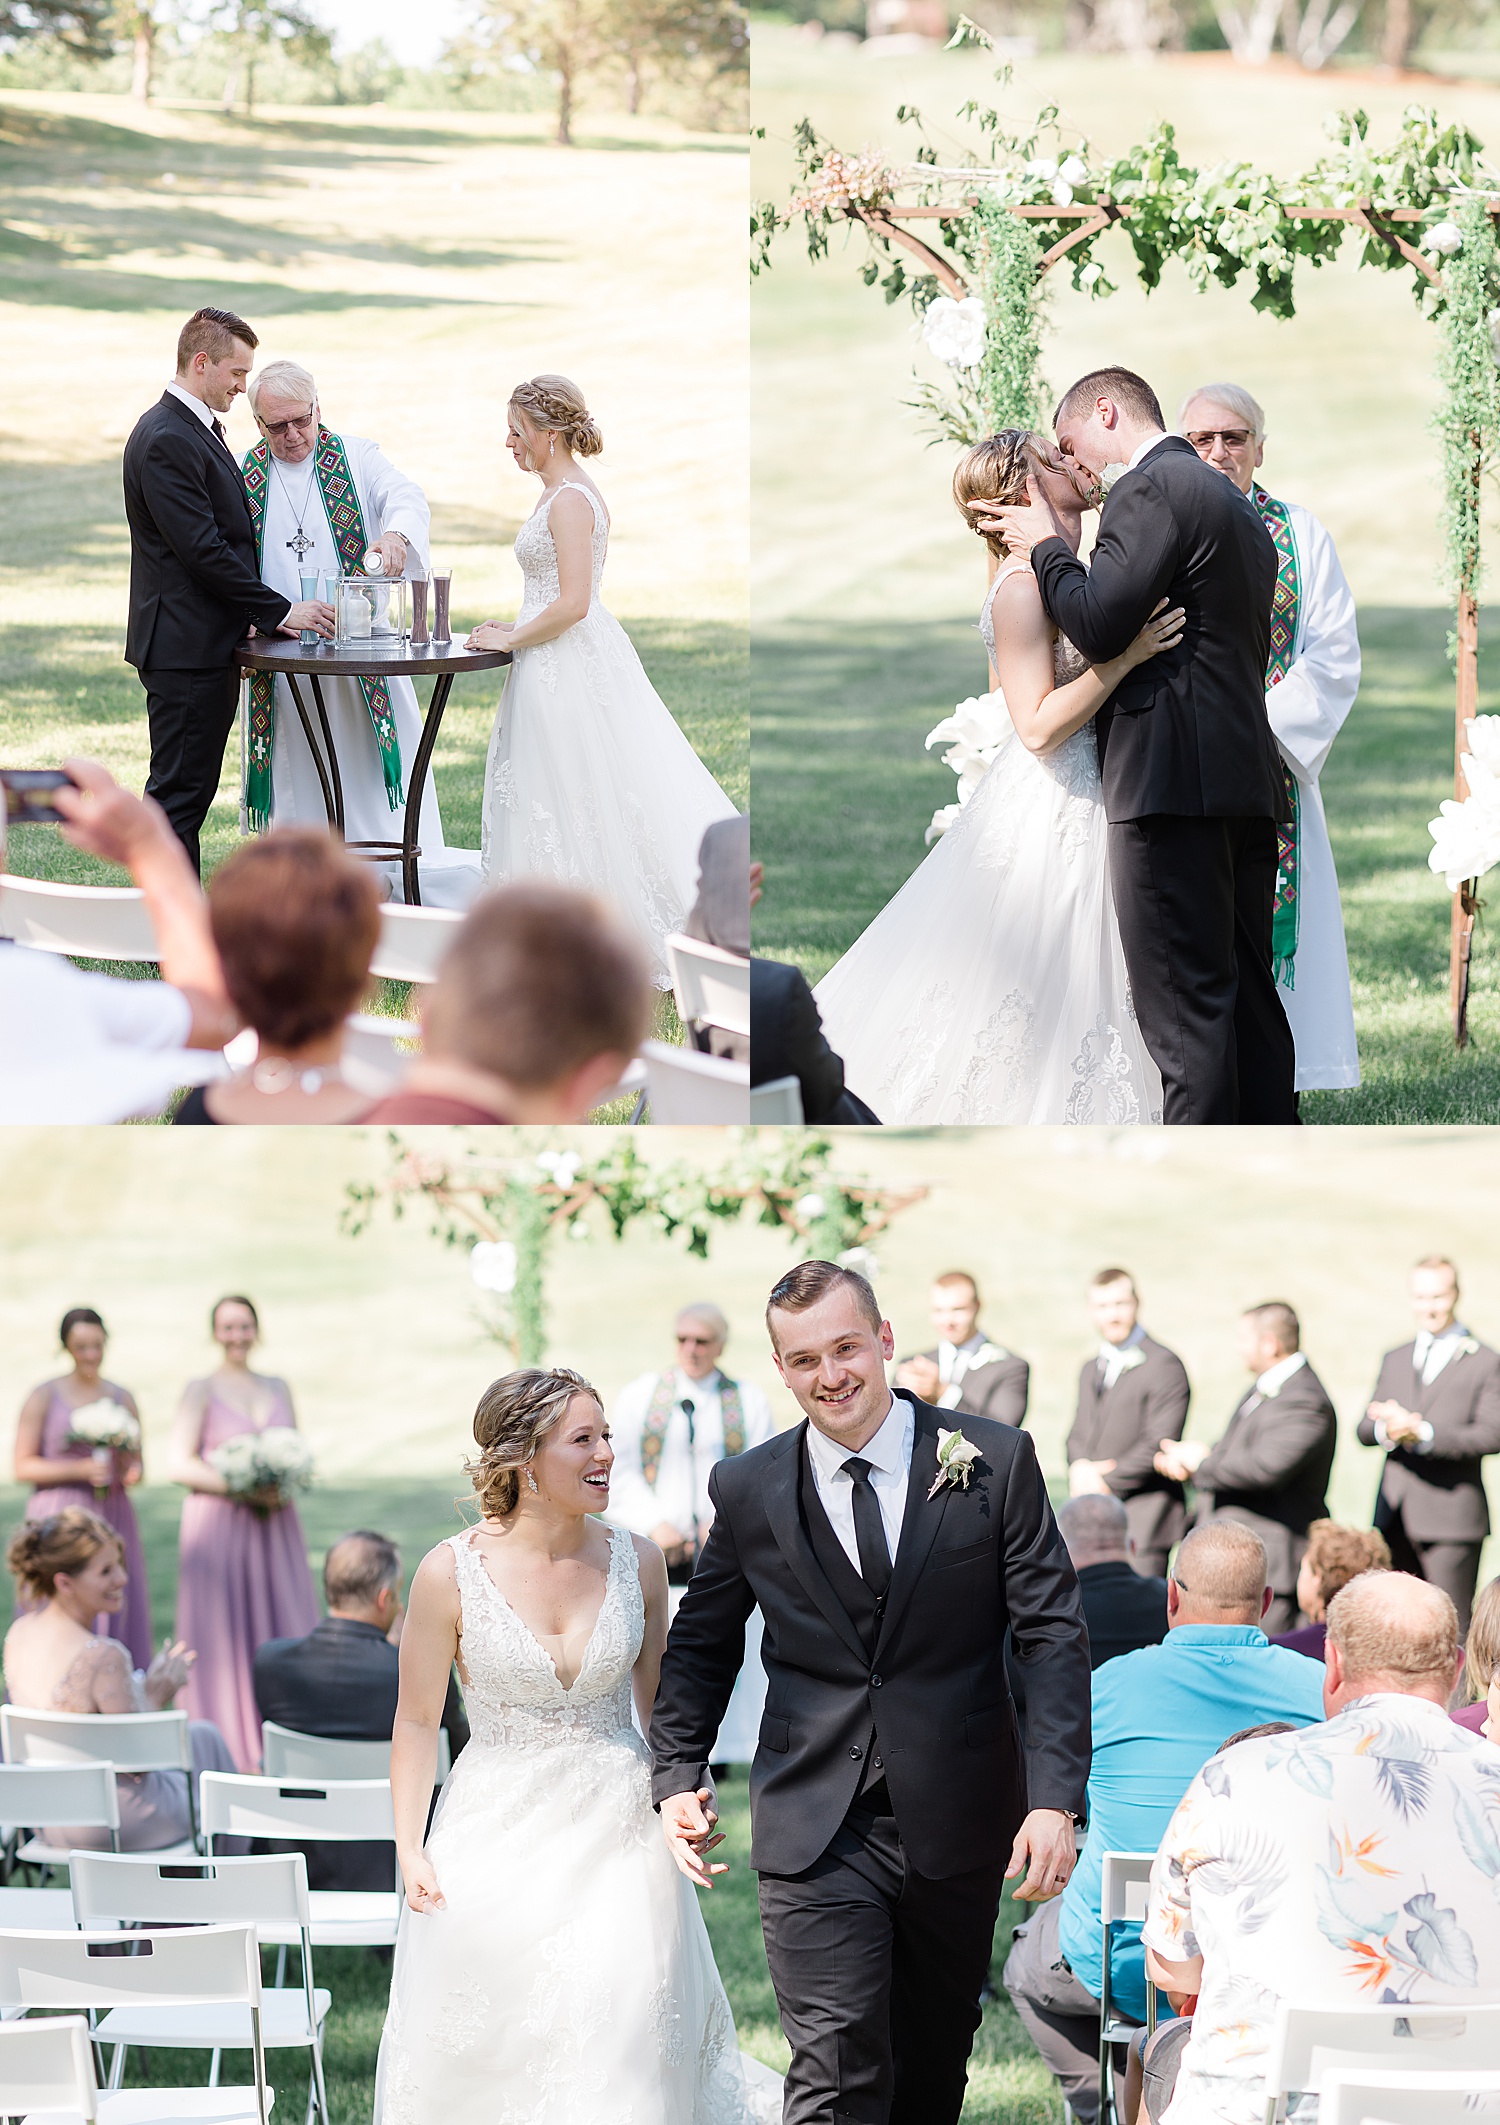 ceremony unity and first kiss at Fair Hills Resort wedding venue 